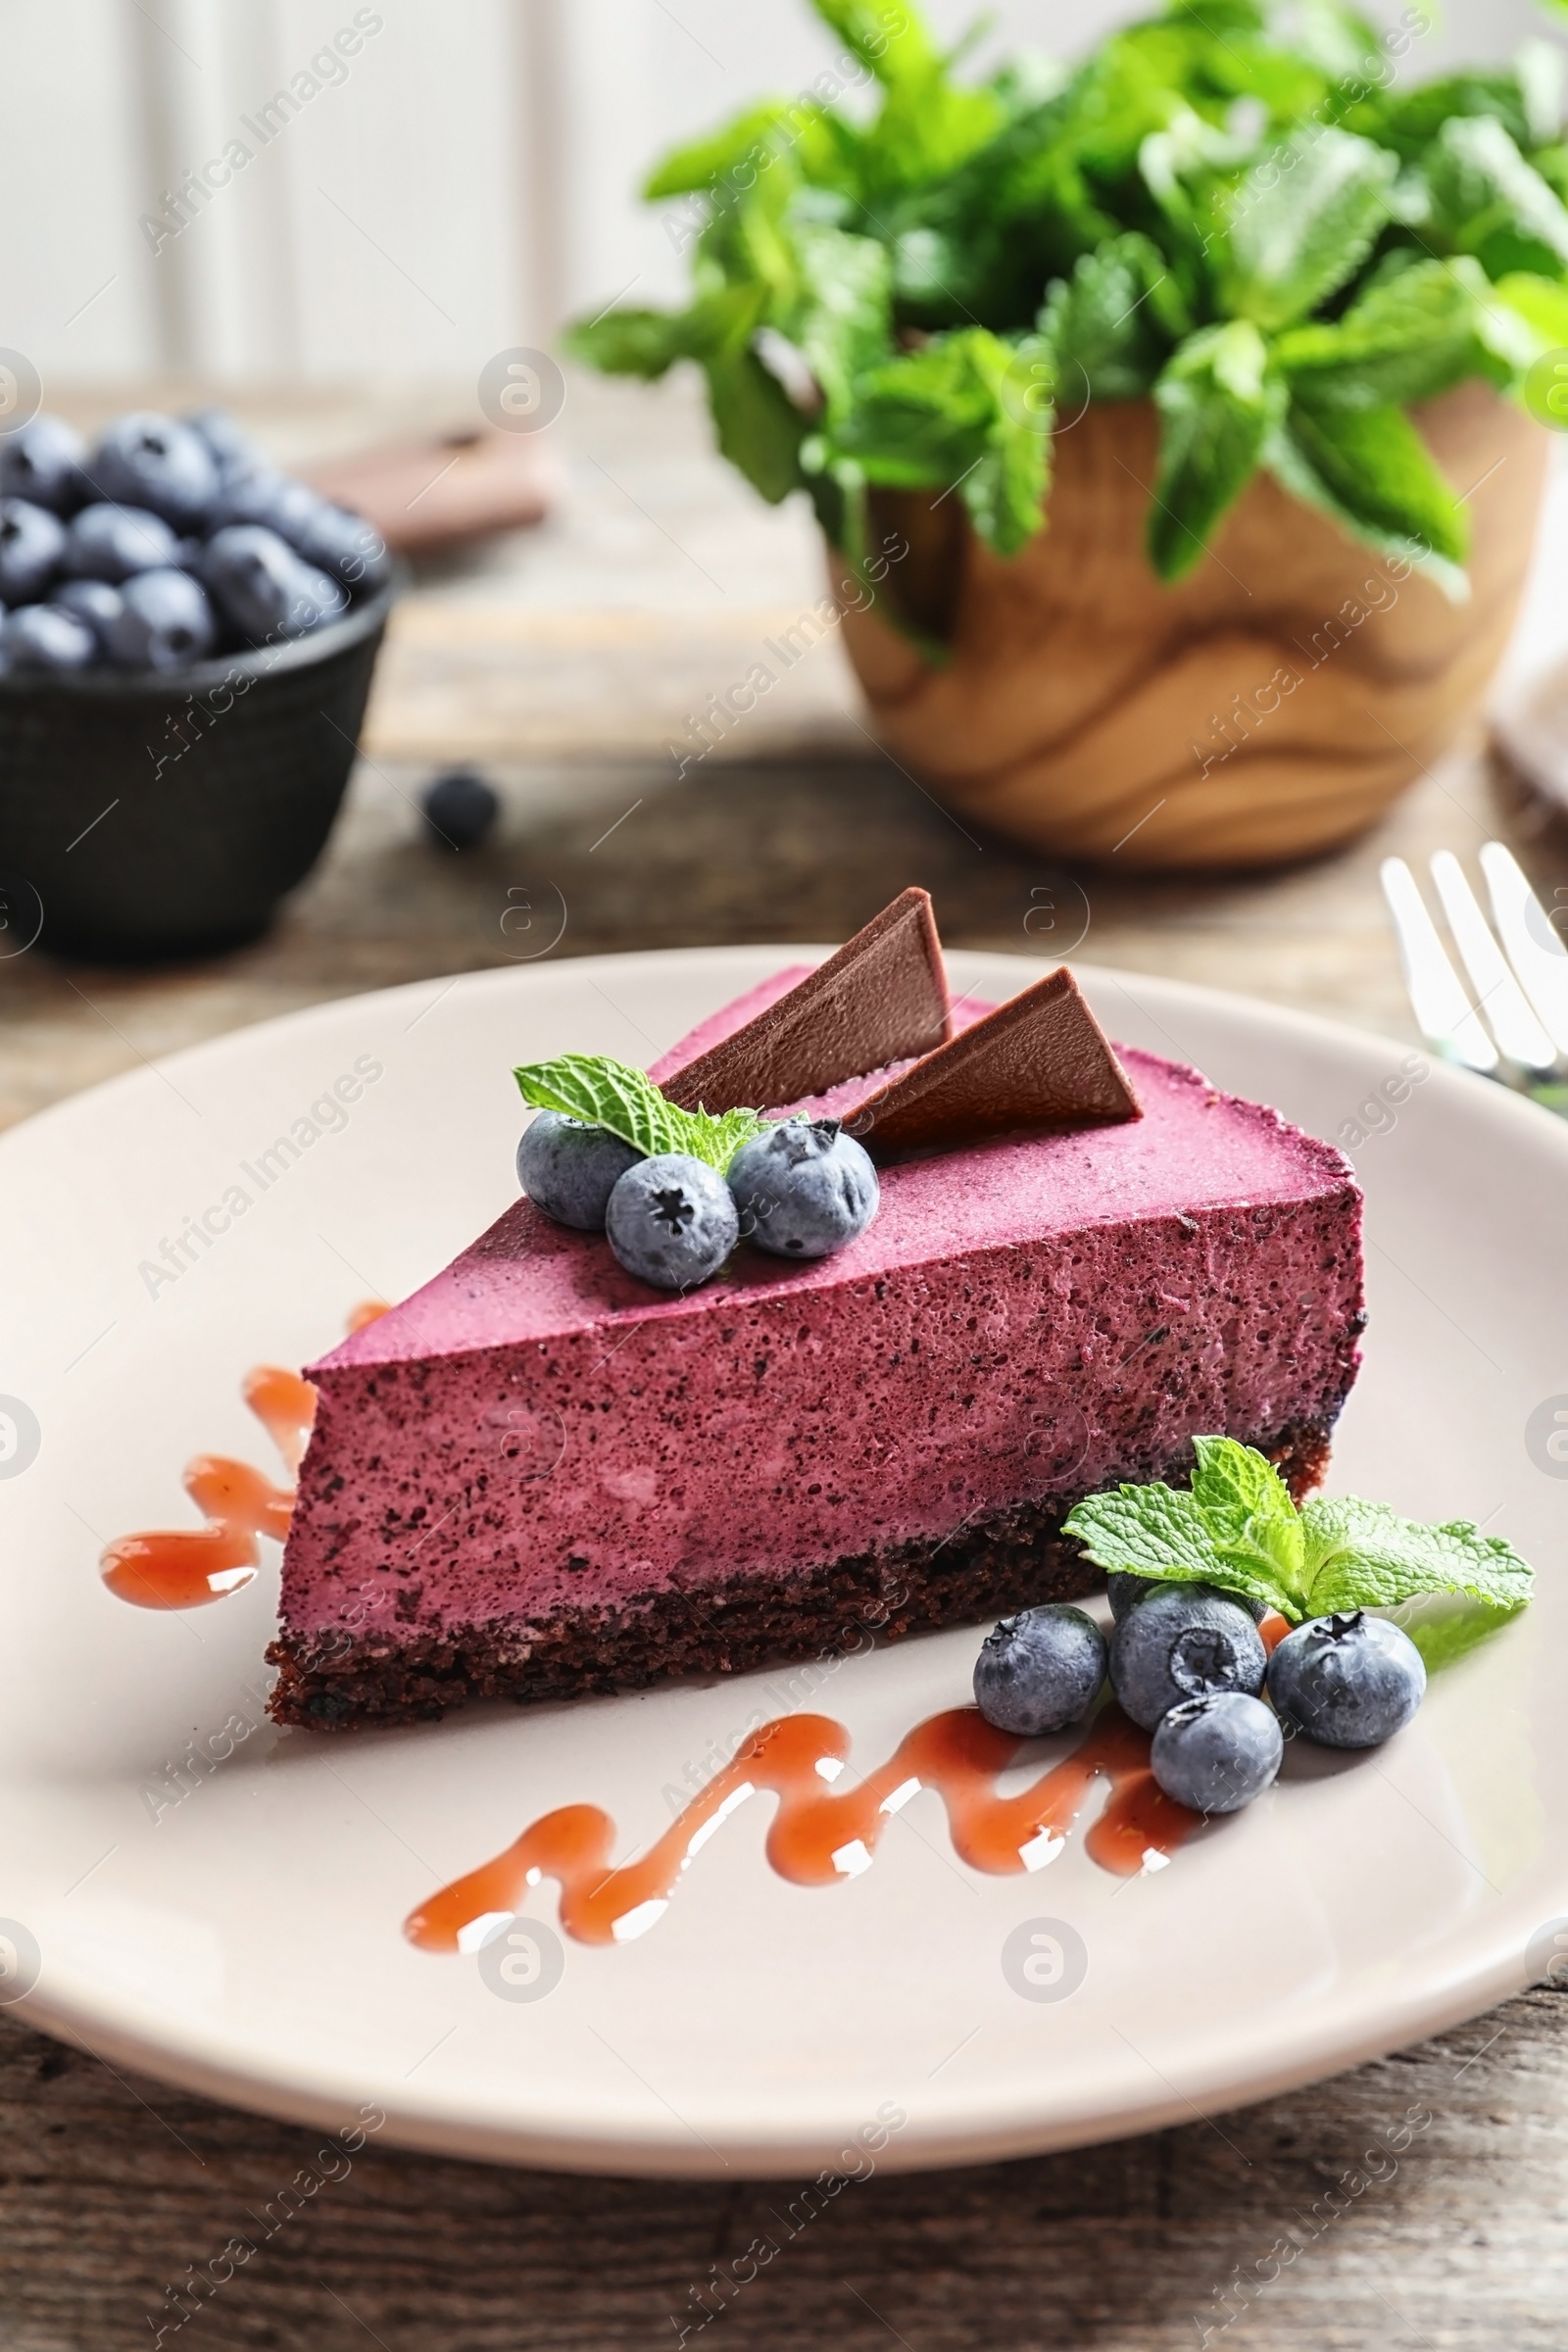 Photo of Plate with piece of tasty blueberry cake on wooden table